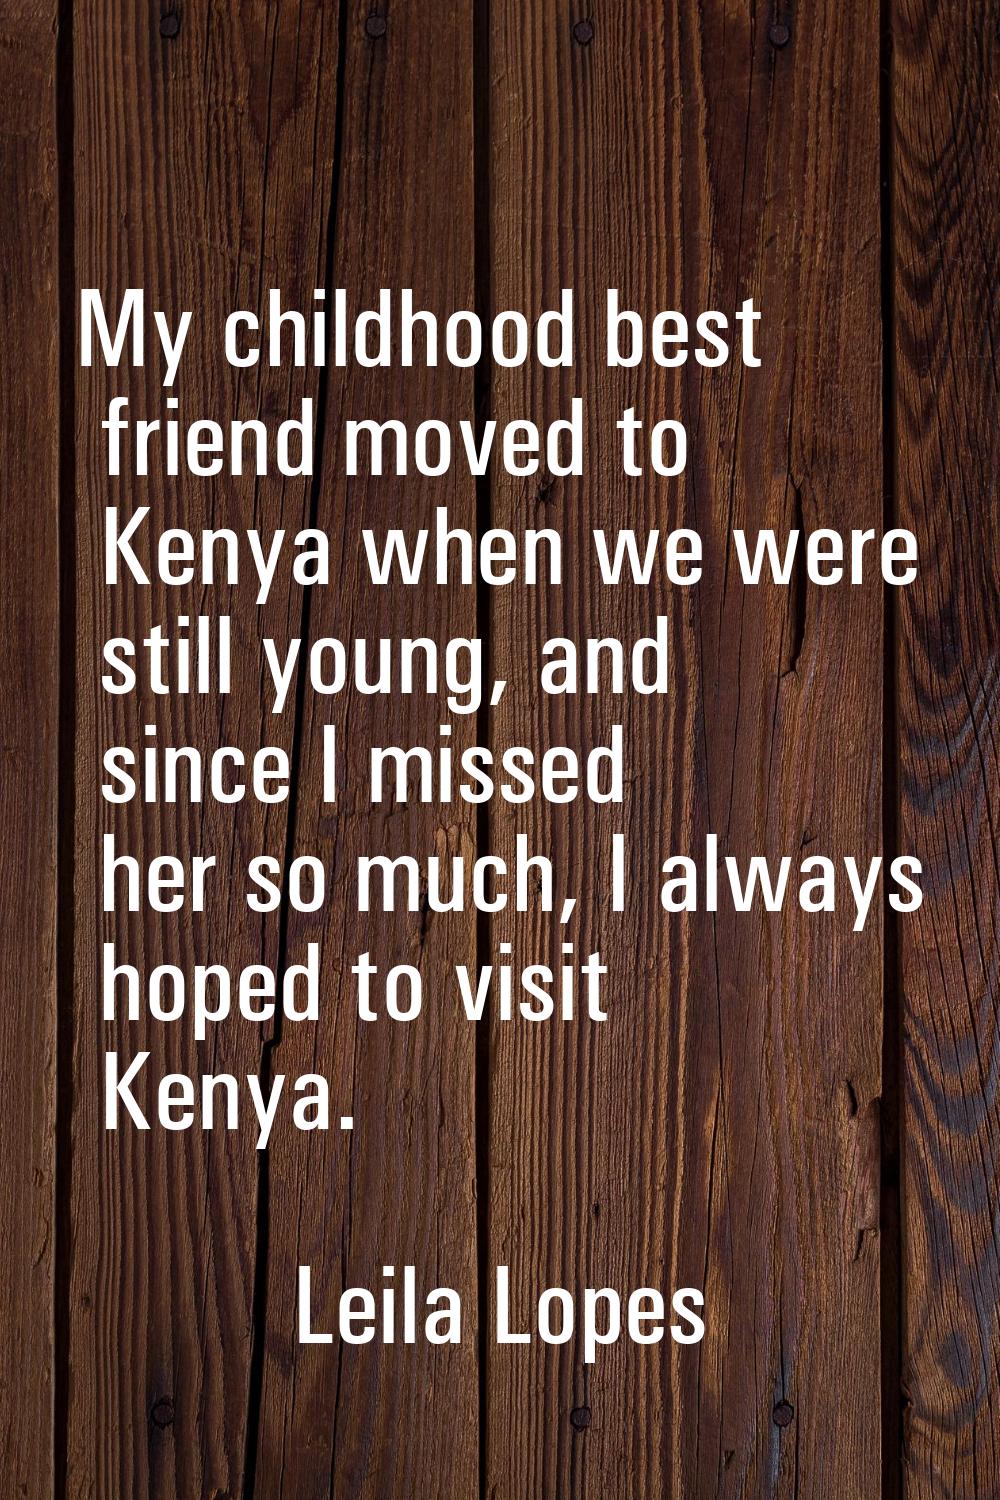 My childhood best friend moved to Kenya when we were still young, and since I missed her so much, I